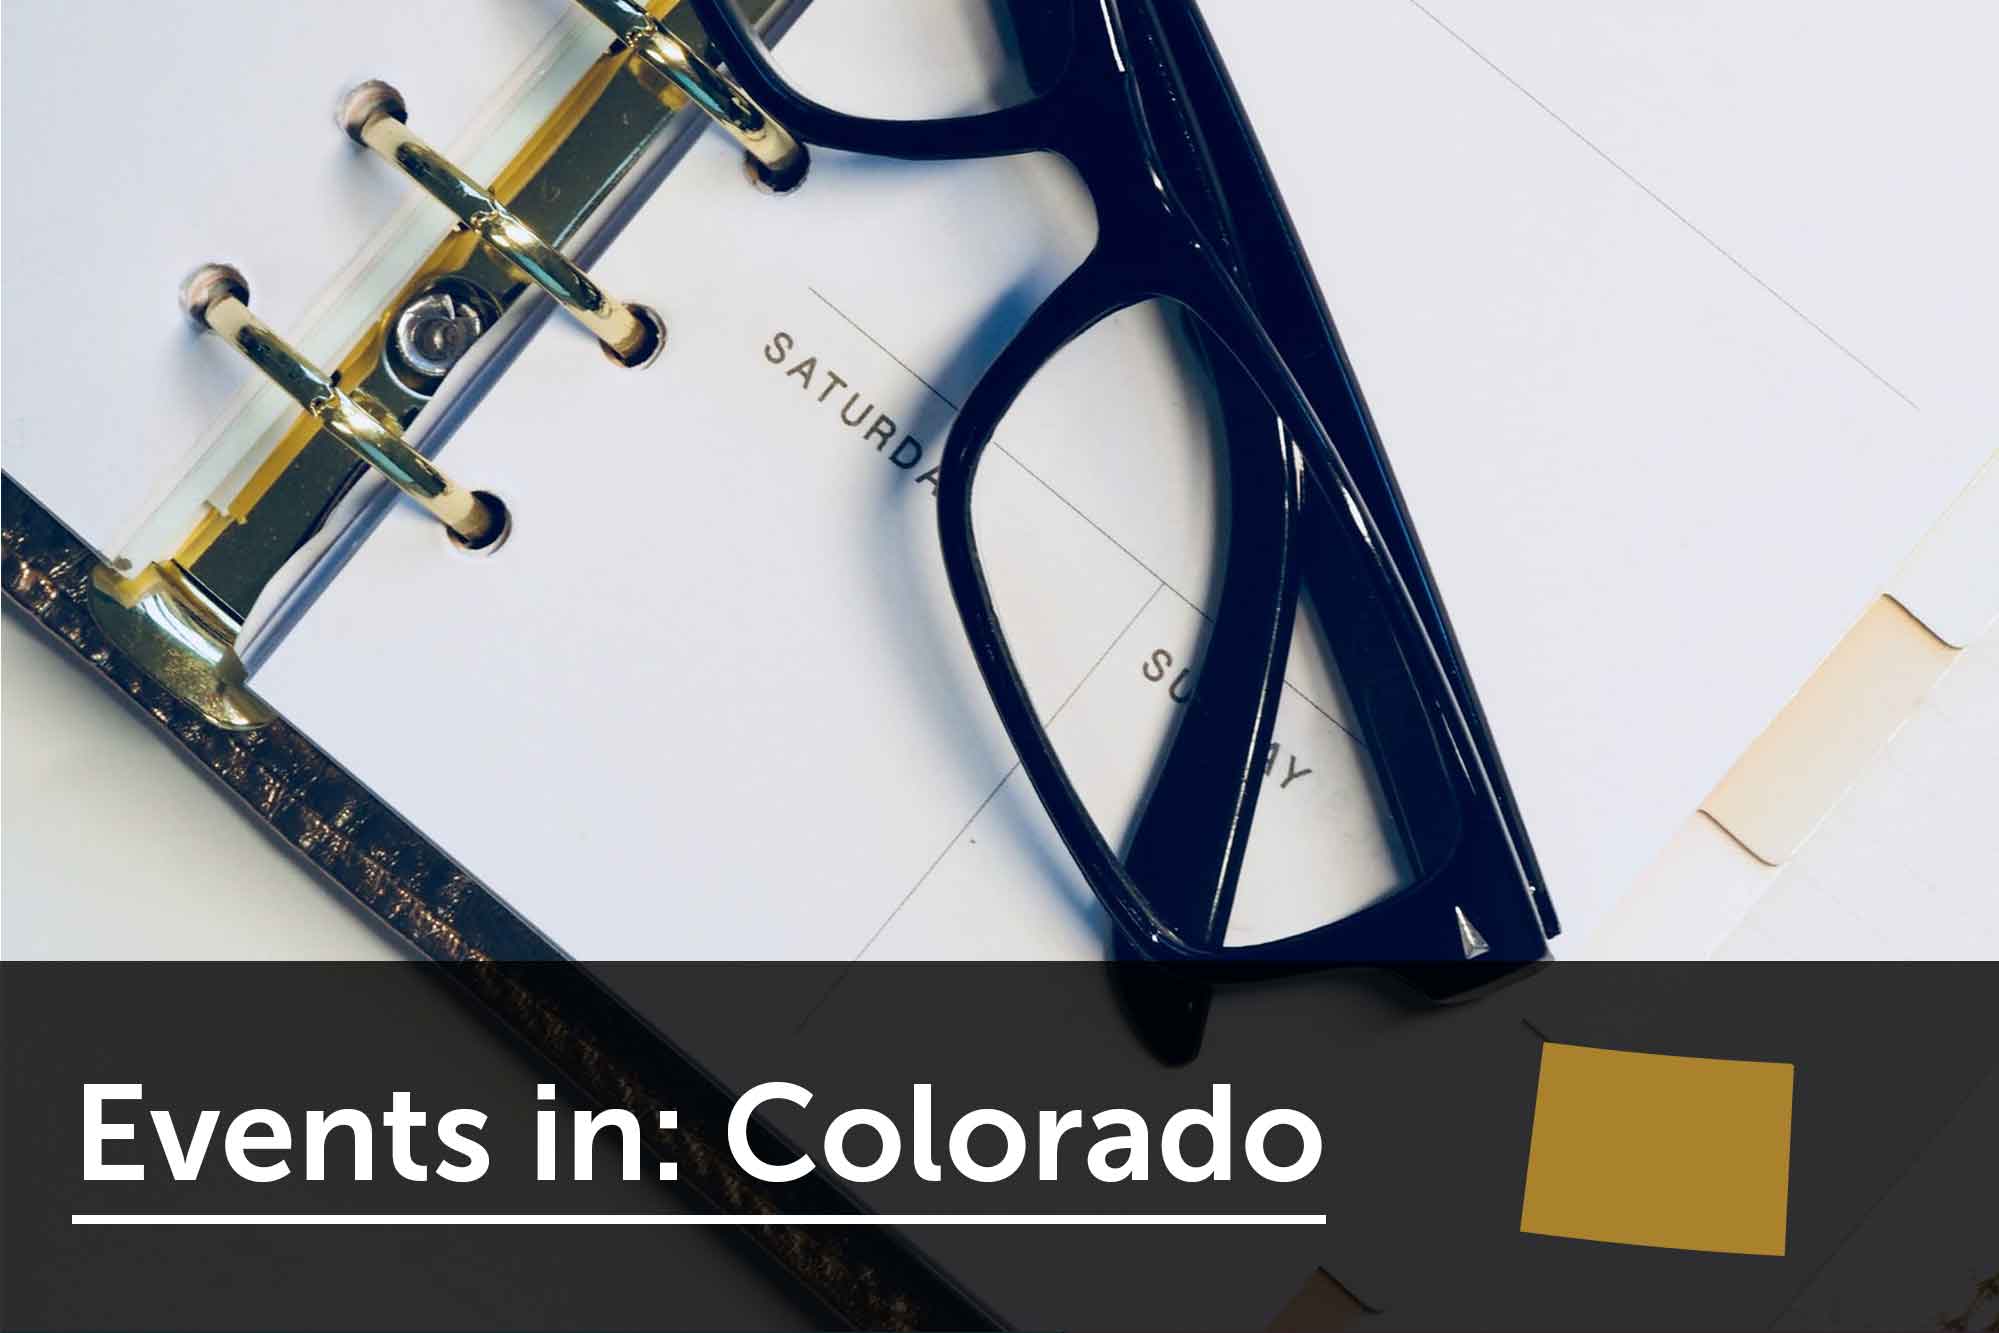 Women's business events in Colorado